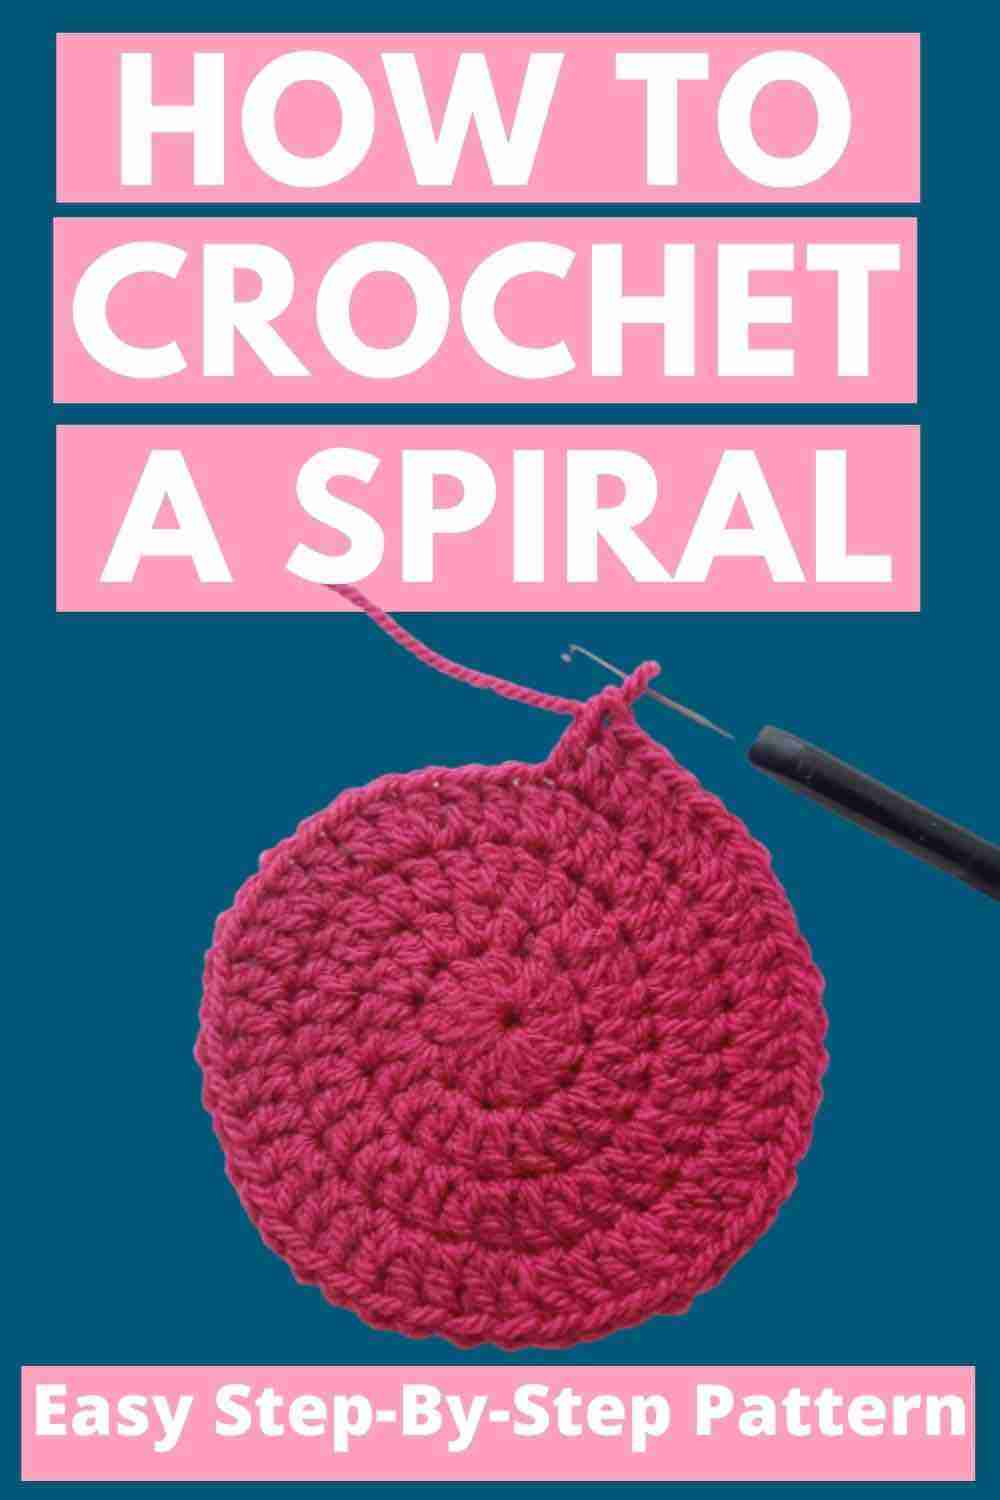 How-To-Crochet-A-Spiral-Step-by-Step-Tutorial.